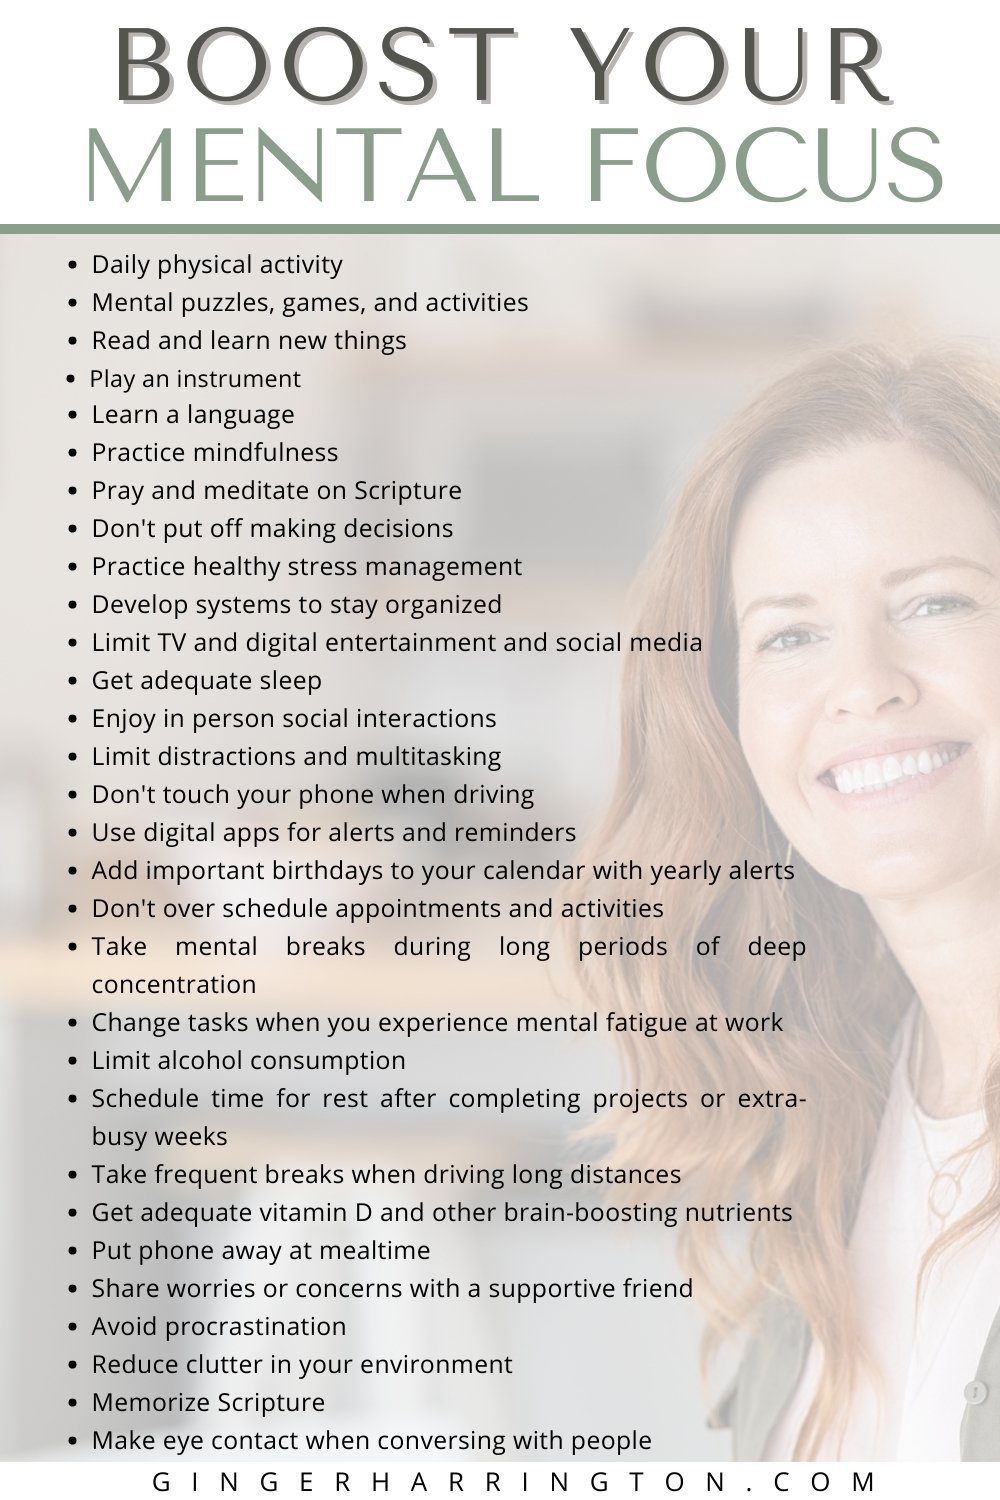 Smiling woman is background for a list of ways to increase mental focus.